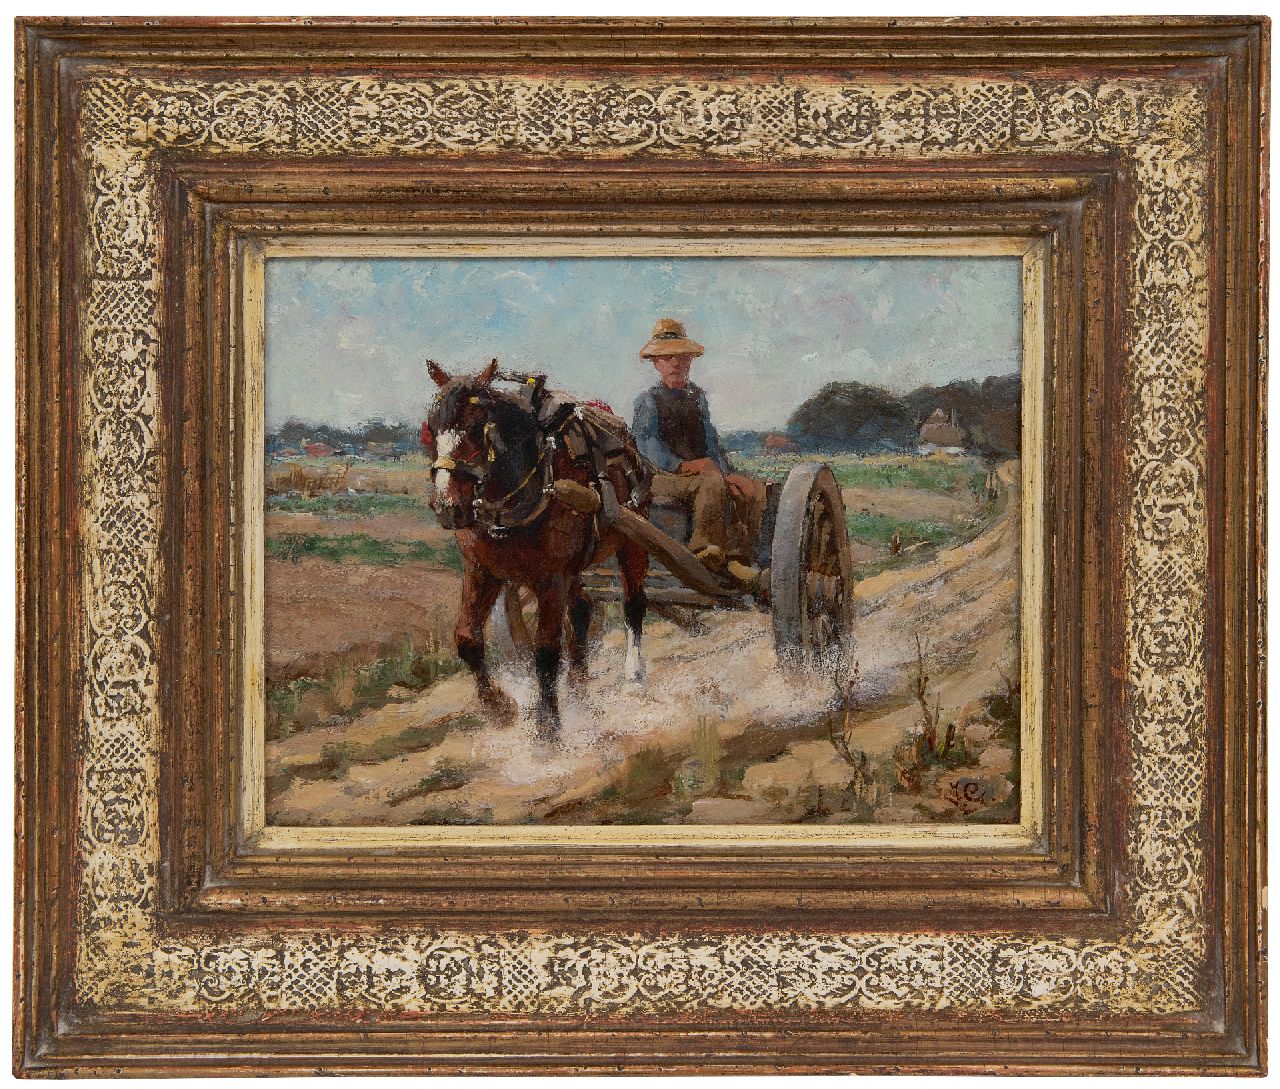 Geerlings J.H.  | Jacob Hendrik Geerlings | Paintings offered for sale | Horse and carriage on a country road, oil on panel 21.5 x 28.7 cm, signed l.r.